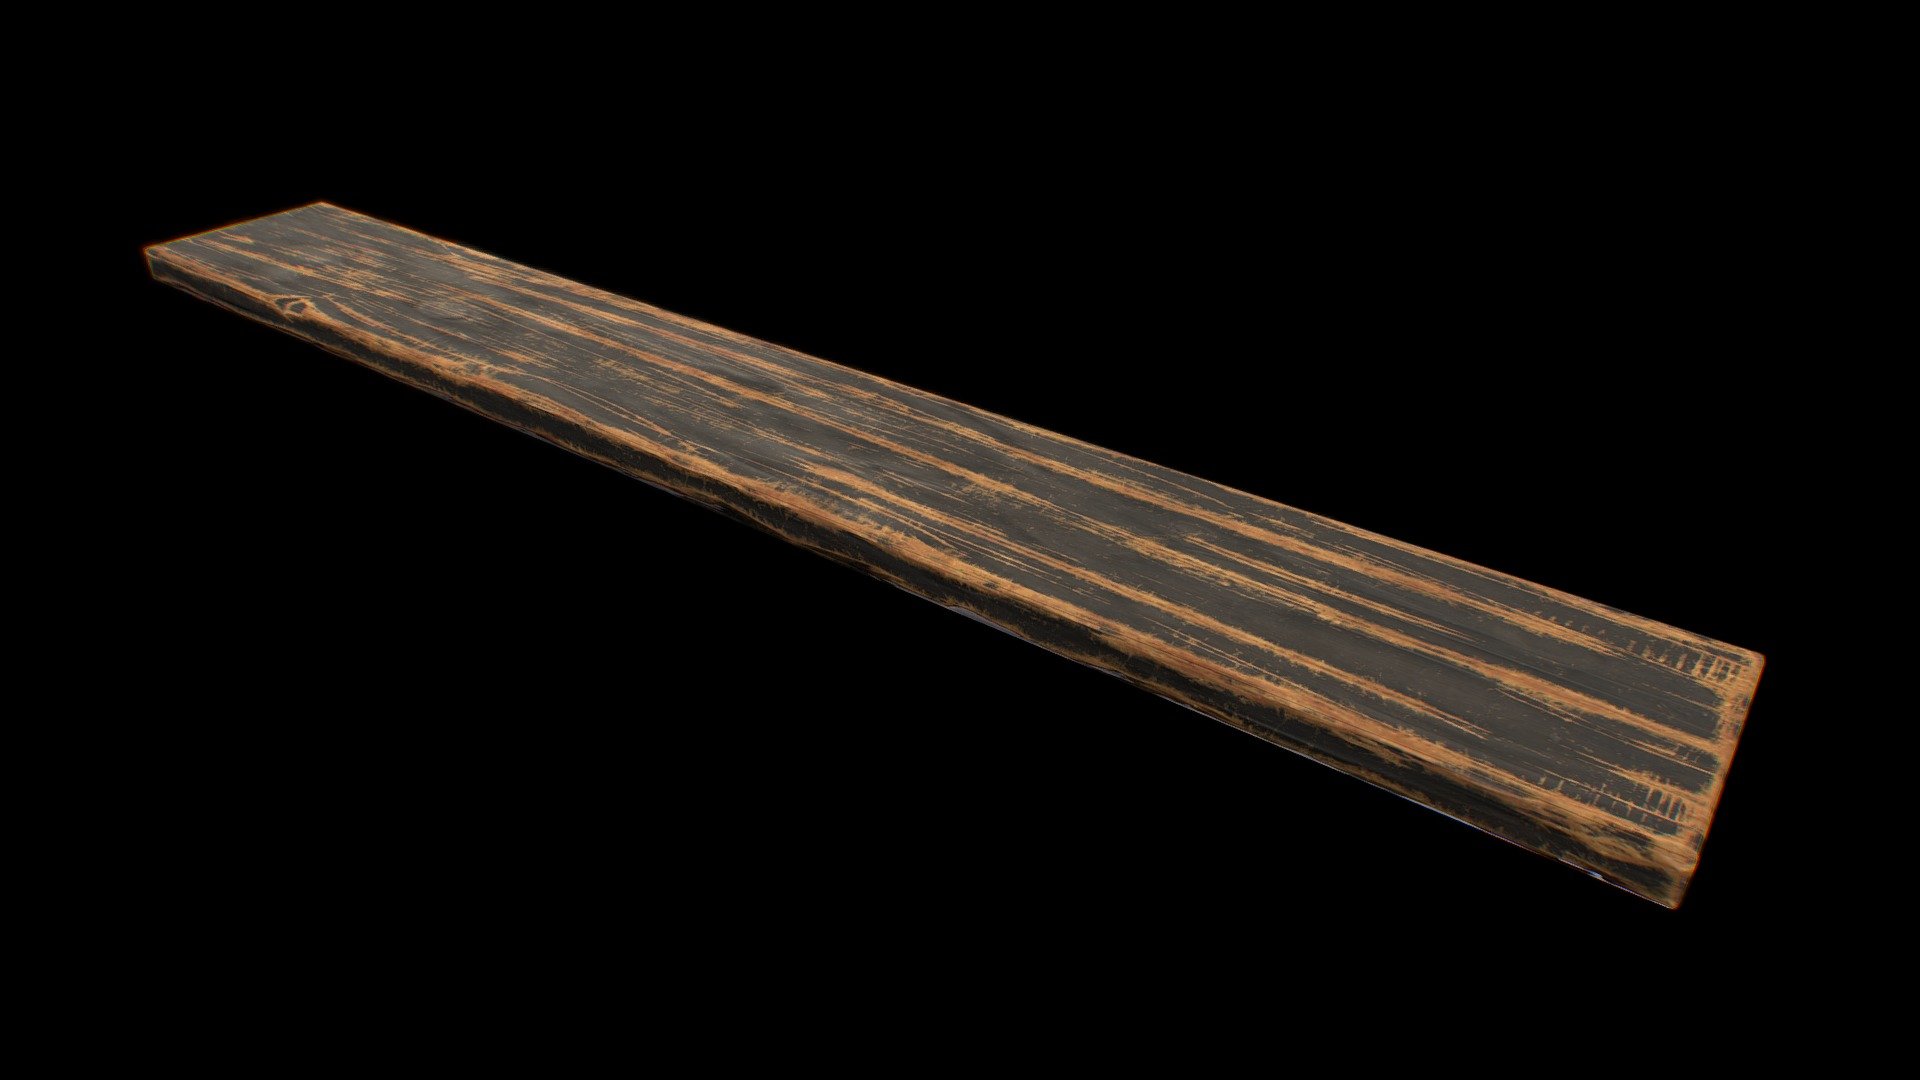 Worn painted board. Low poly PBR textured wooden plank.  Simple wooden plank for an in-progress game project 3d model